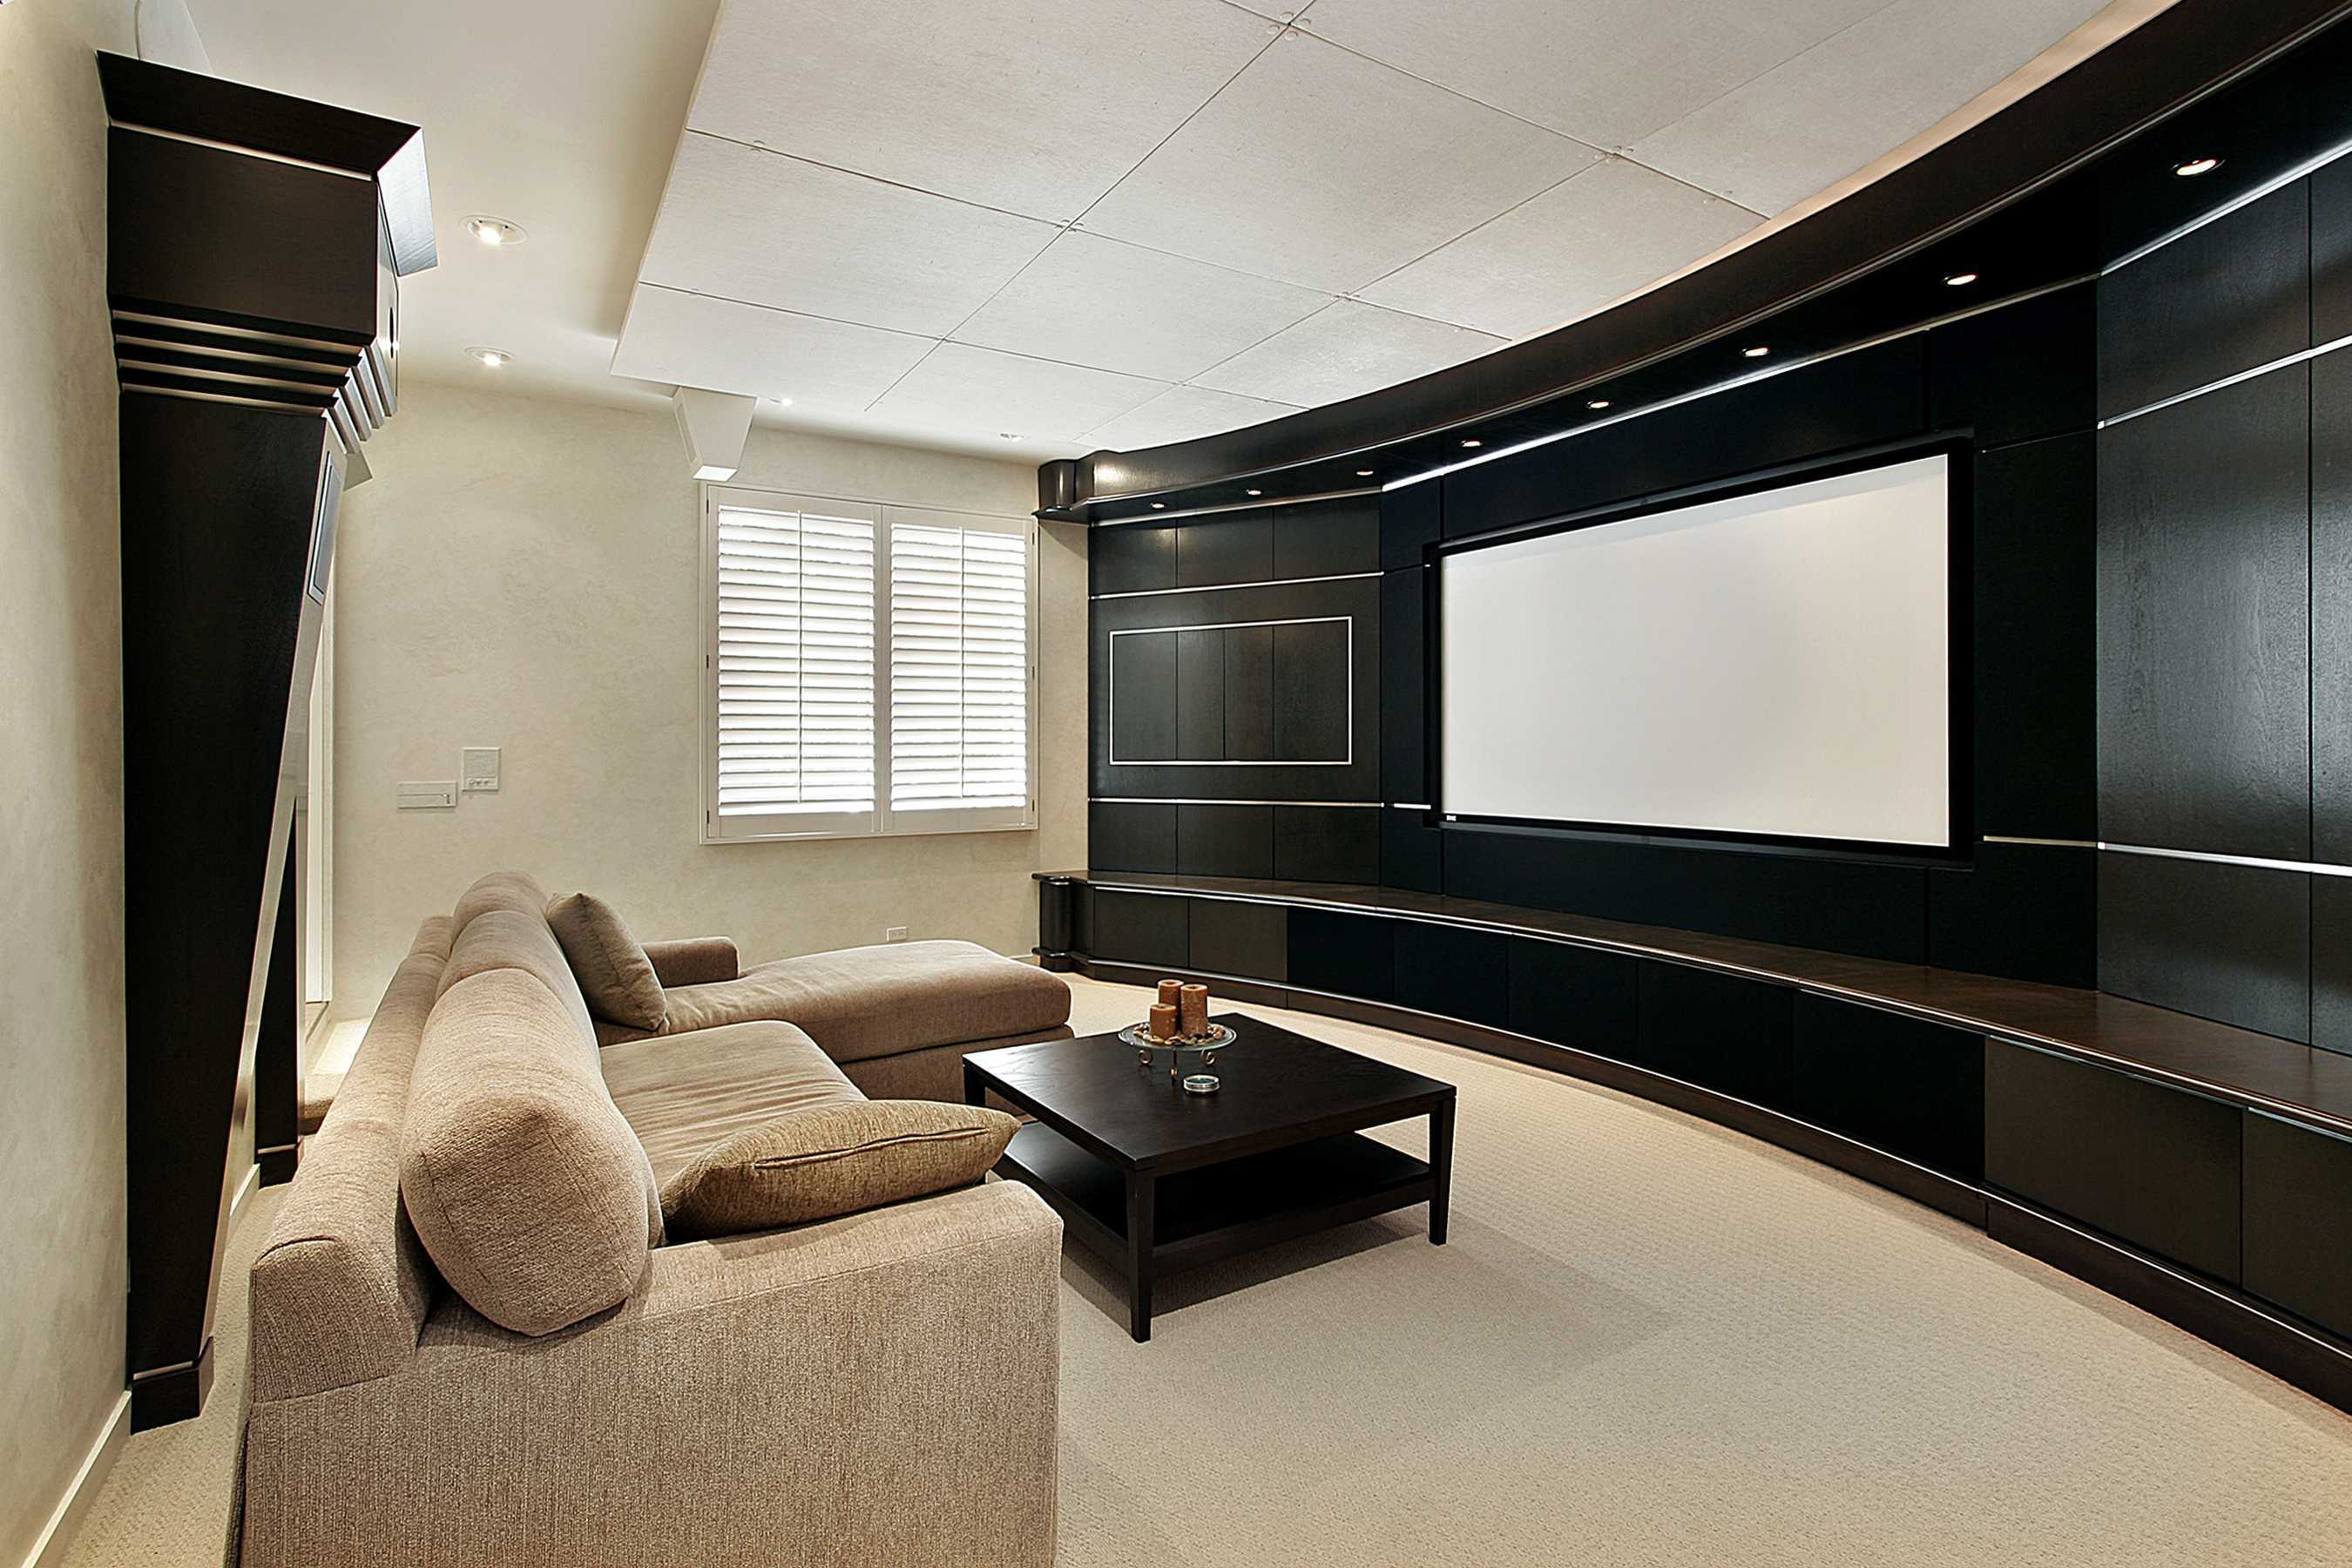 Netflixing and Chilling the Right Way: Installing Your Home Theater System